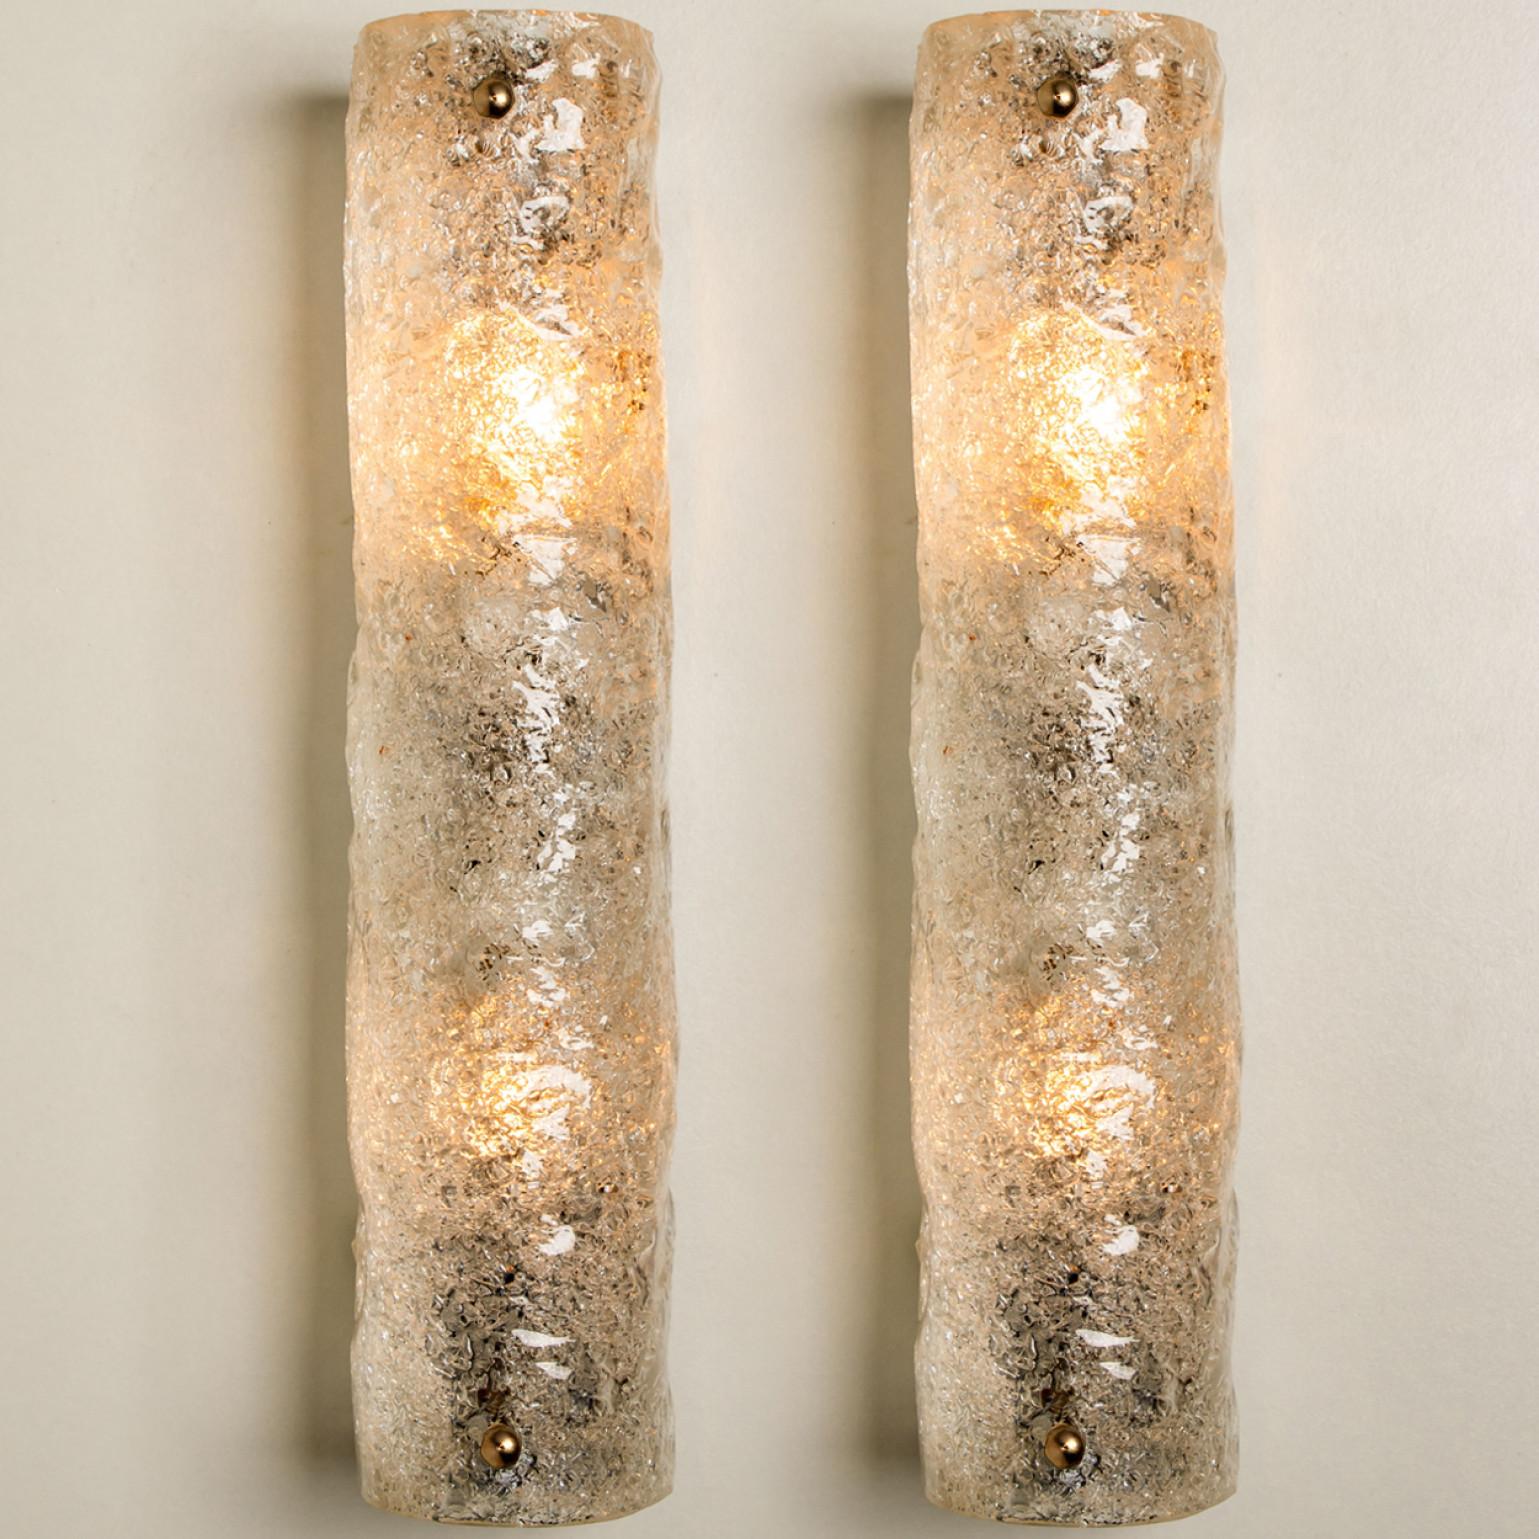 Other 1 of 4 Ice Glass Wall Light Fixtures by Hillebrand, Germany, 1960s For Sale